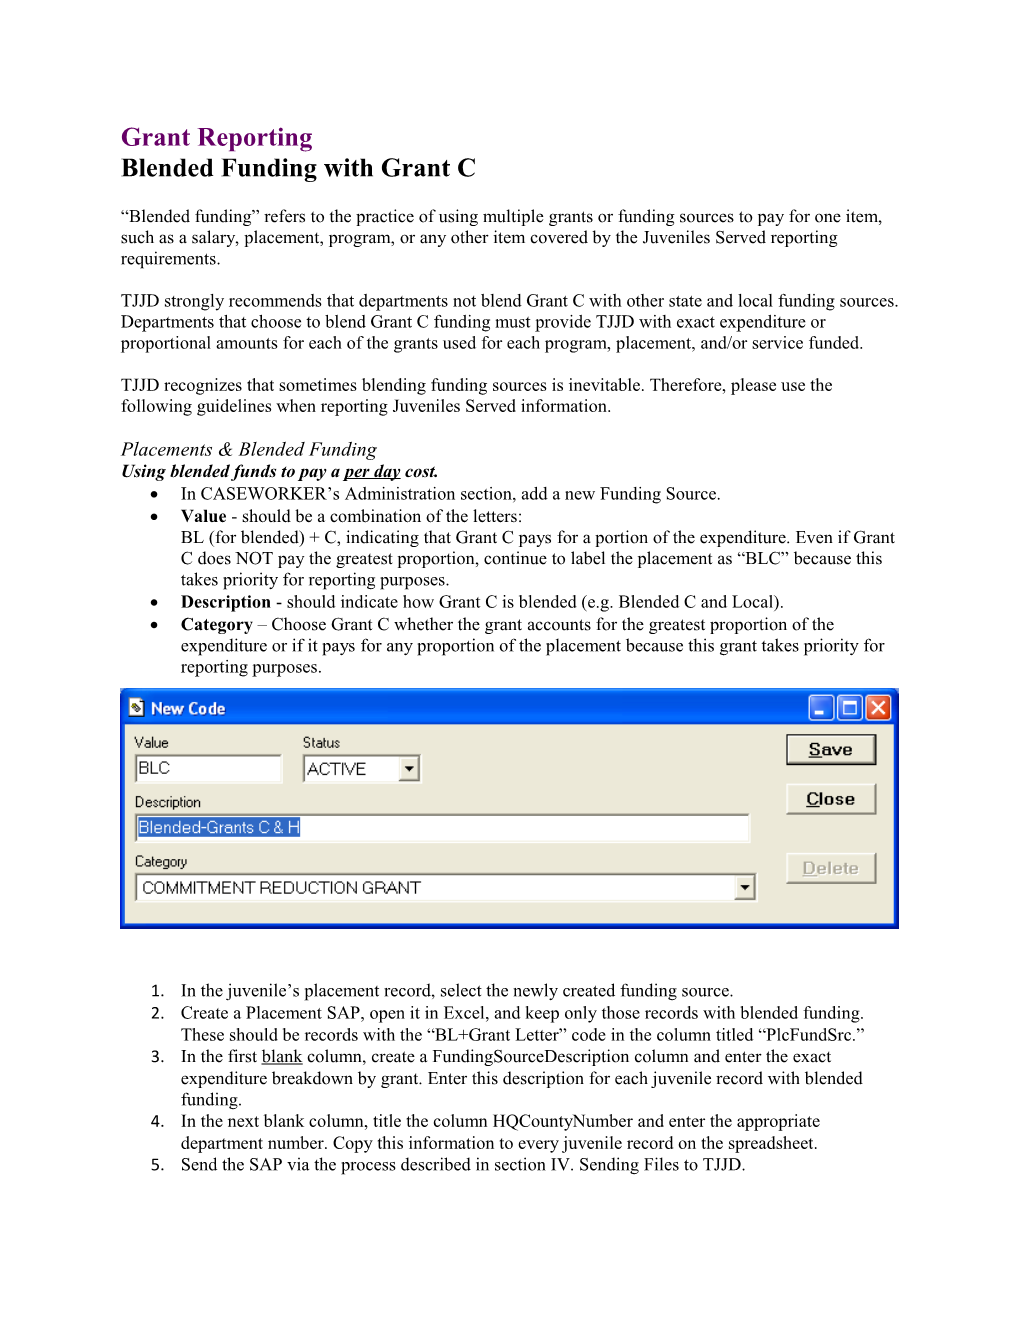 Blended Funding with Grant C